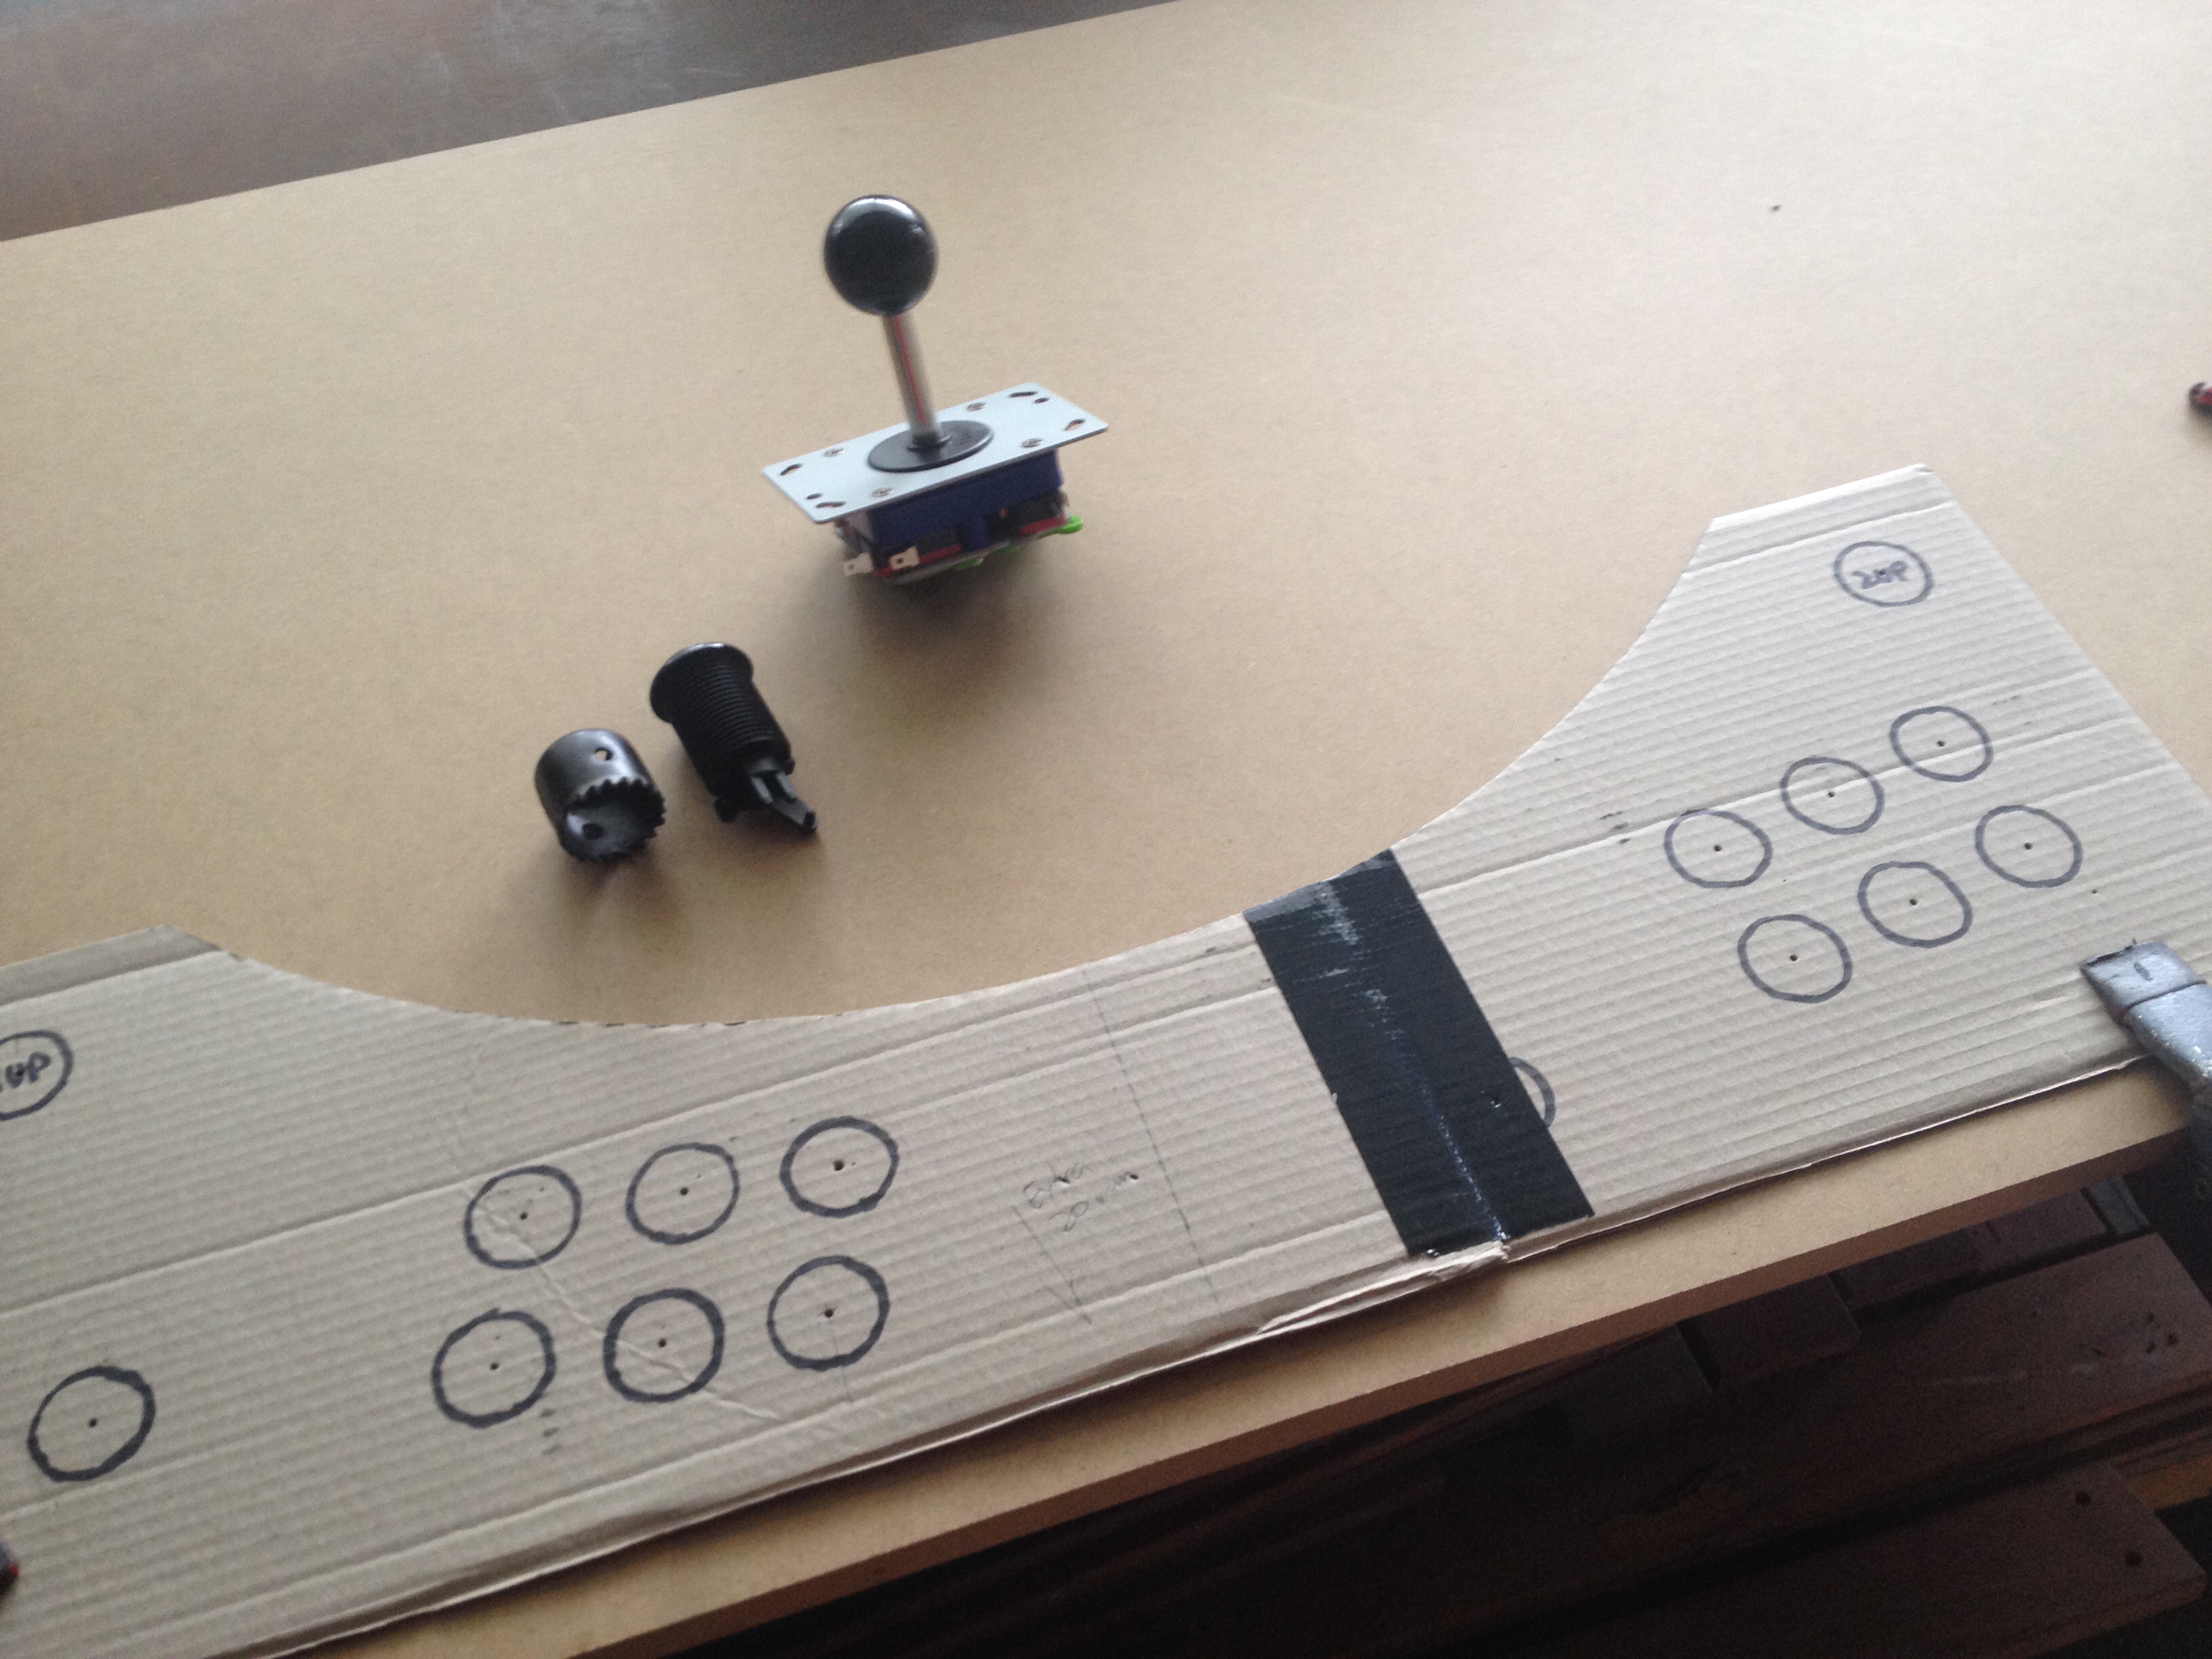 Controller template and hardware